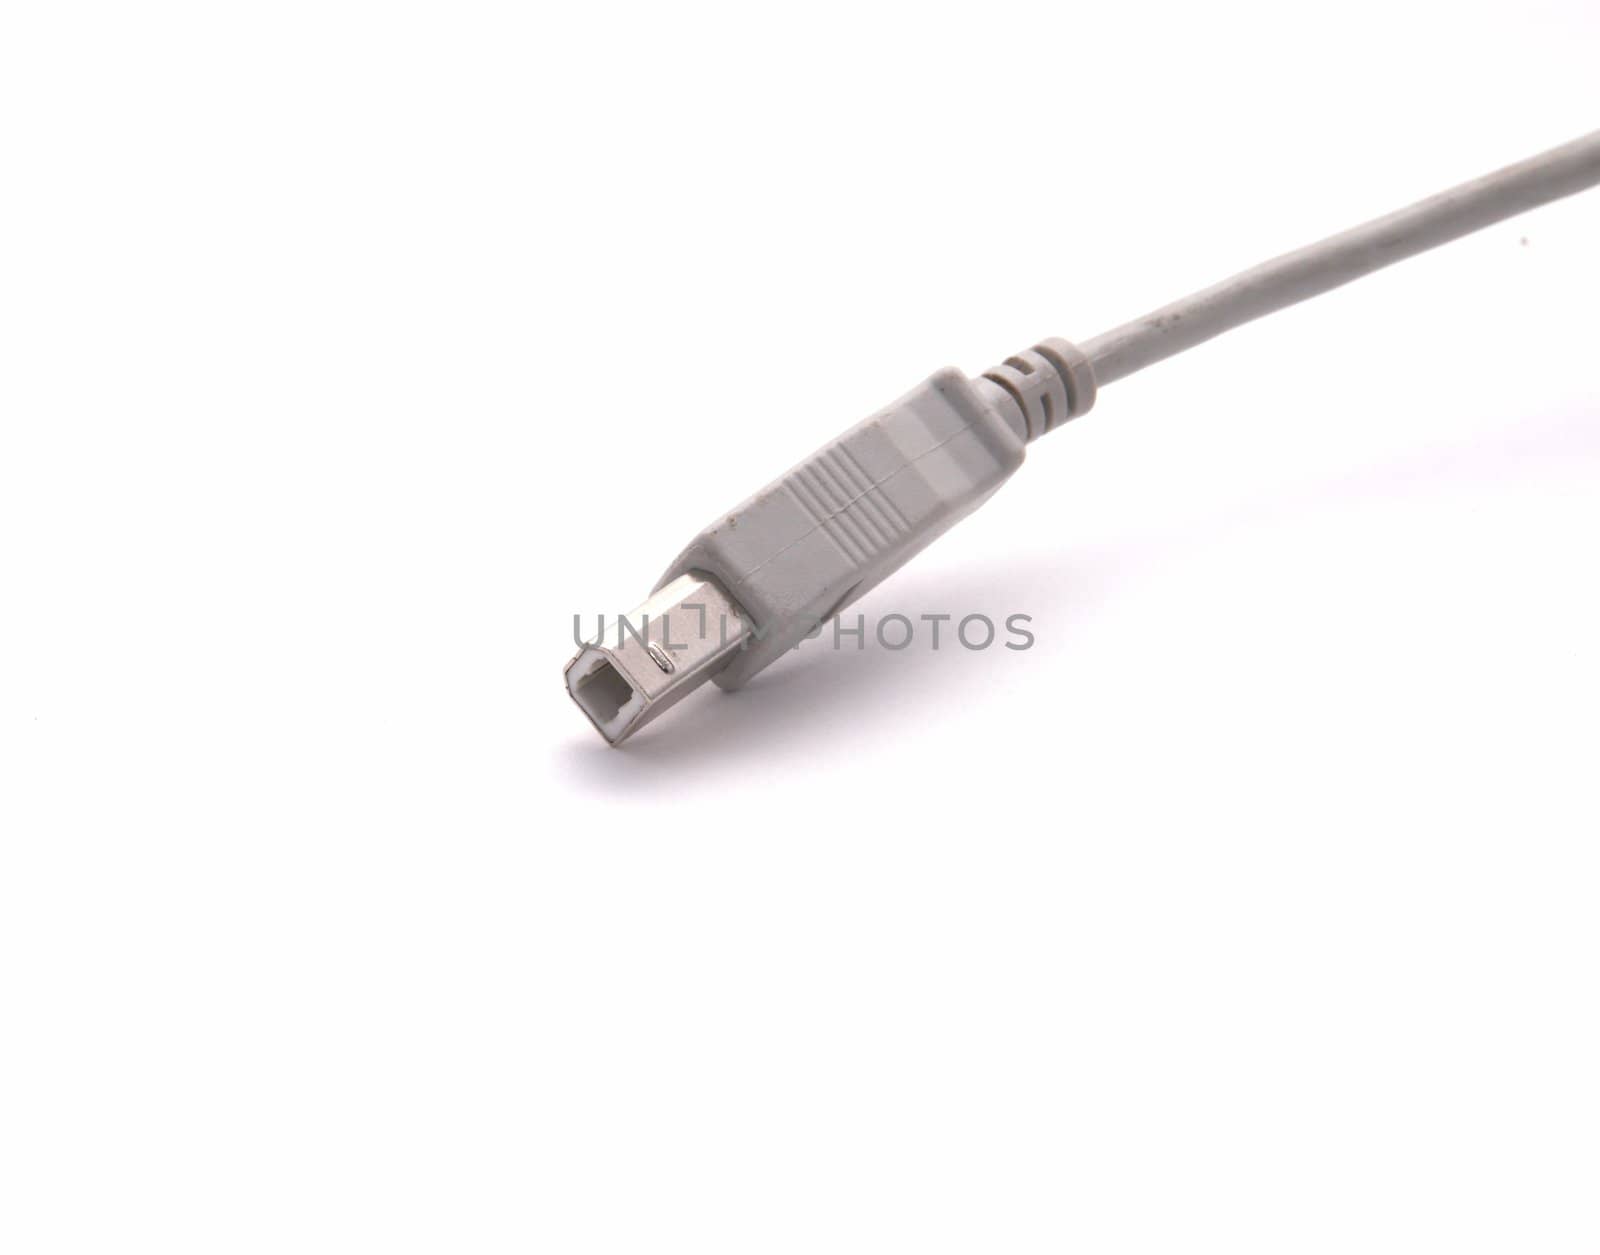 USB connector on a white background by holligan78